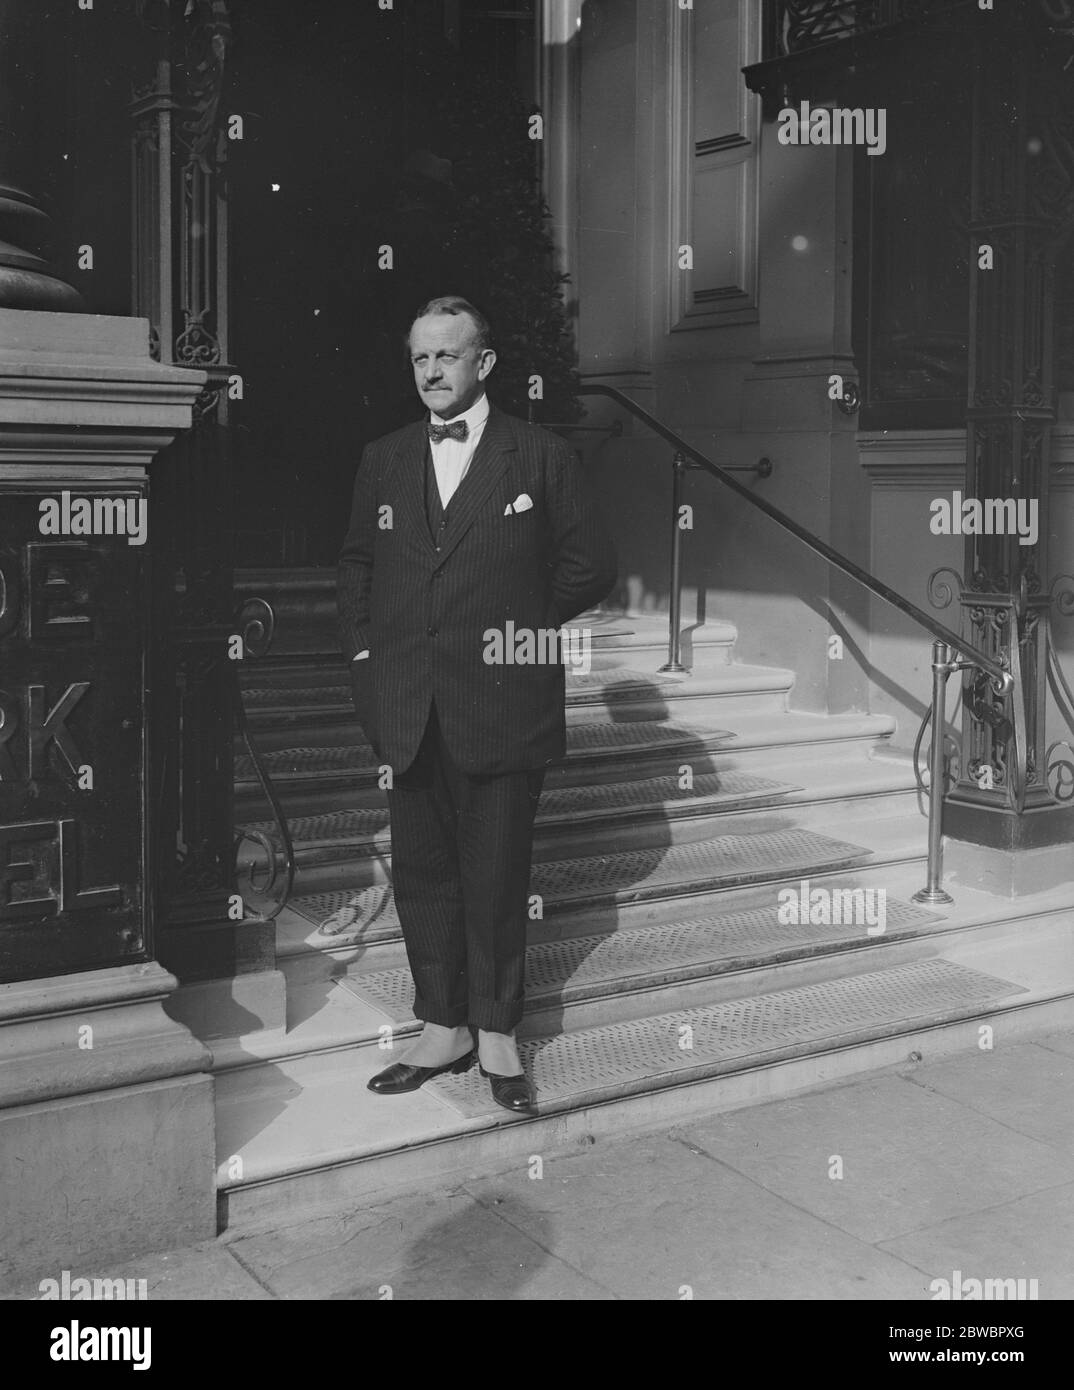 Count Bernstorff in London as Germany 's League of Nations delegate . Count Bernstorff will represent Germany at the meeting of the Council of the International Federation of the League of Nations Societies in London . Count Bernstorff outside his London hotel . 13 October 1924 Stock Photo